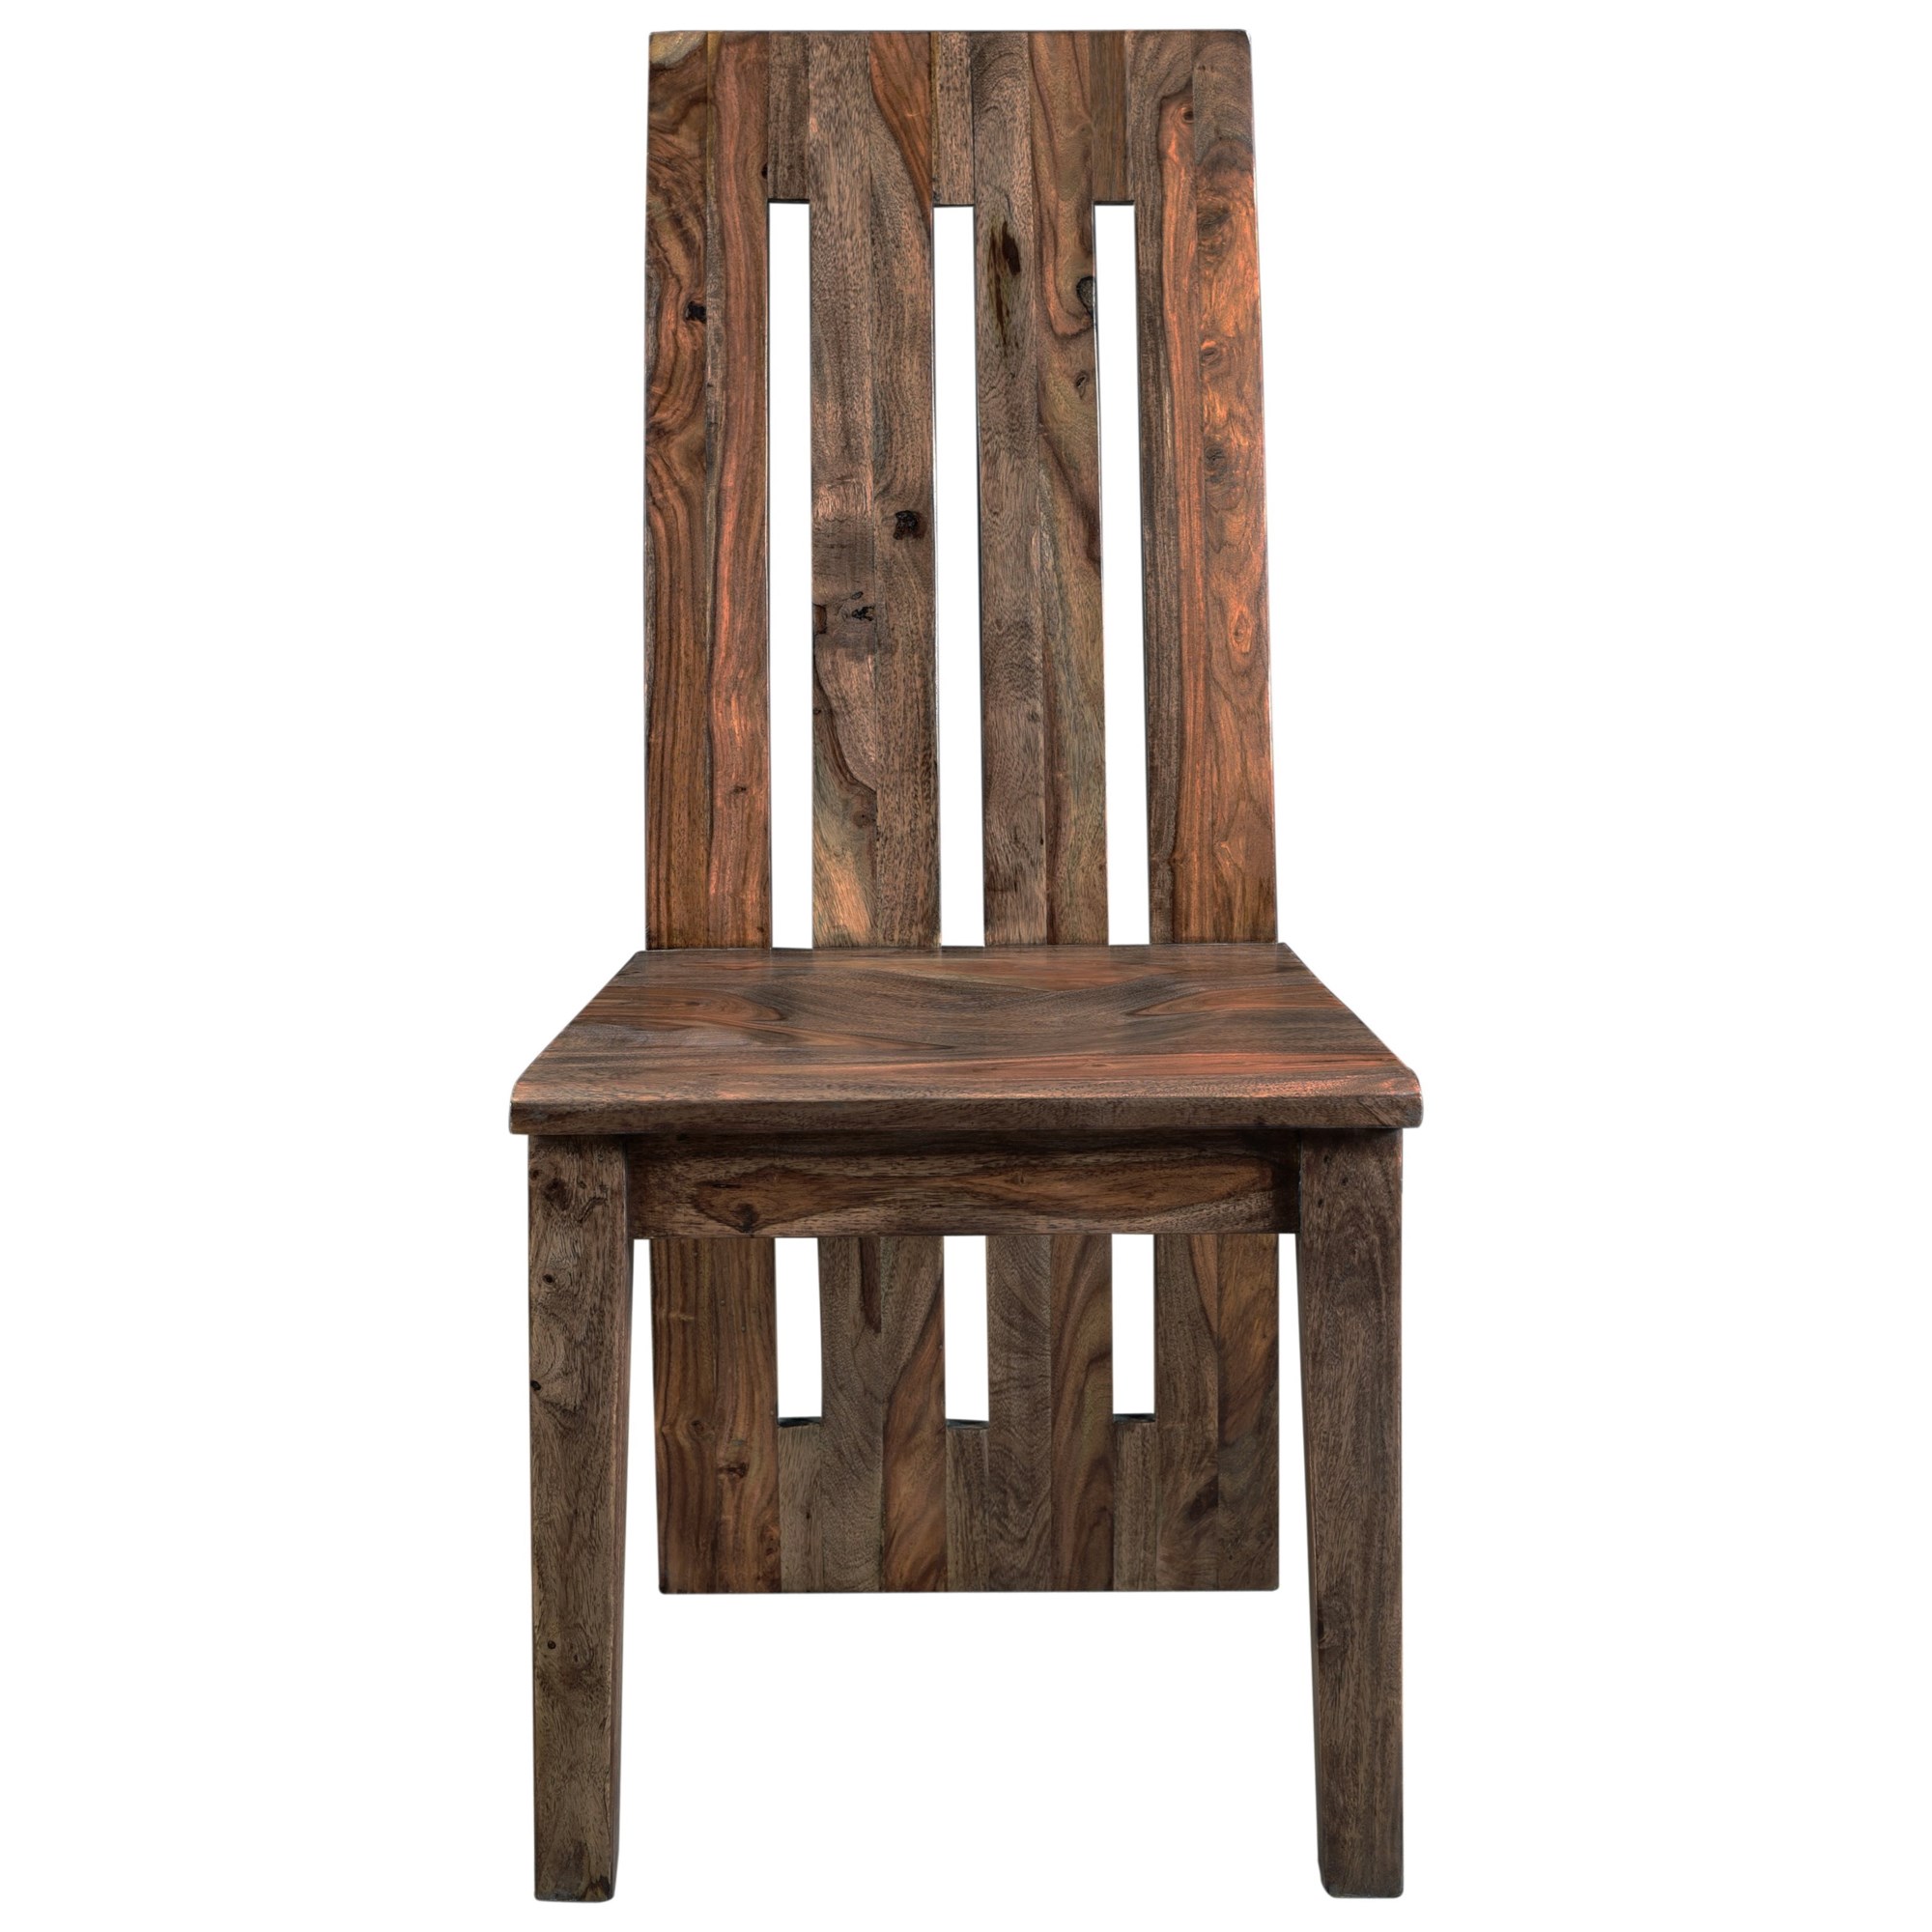 Sheesham Wood Wooden rocking footrest chair with cushion